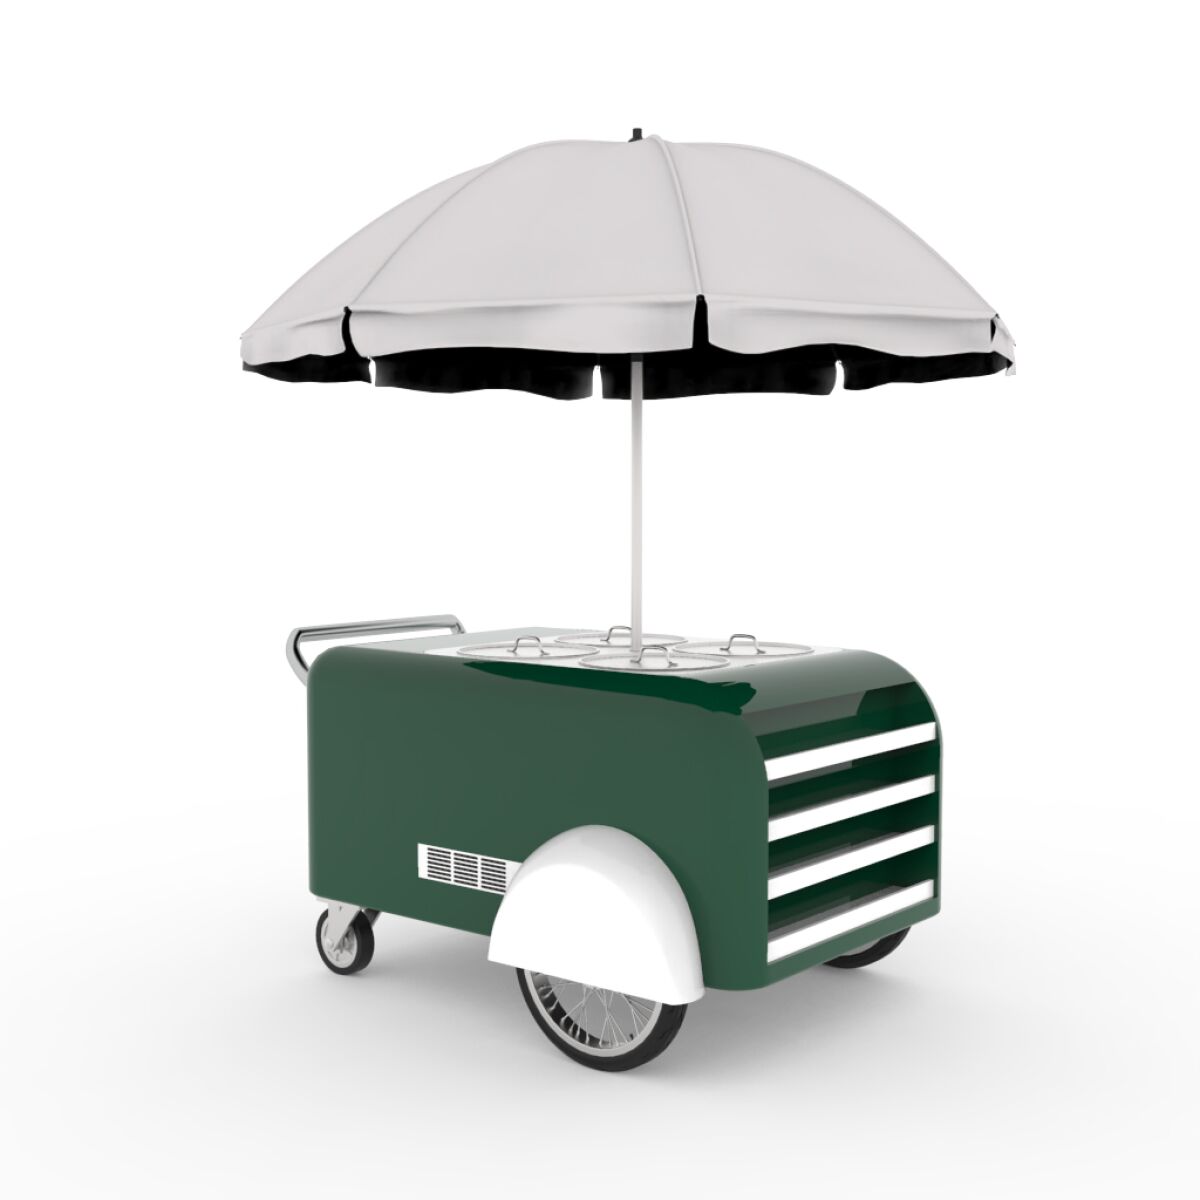 A rendering shows a tamale cart in a deep shade of green with an umbrella.